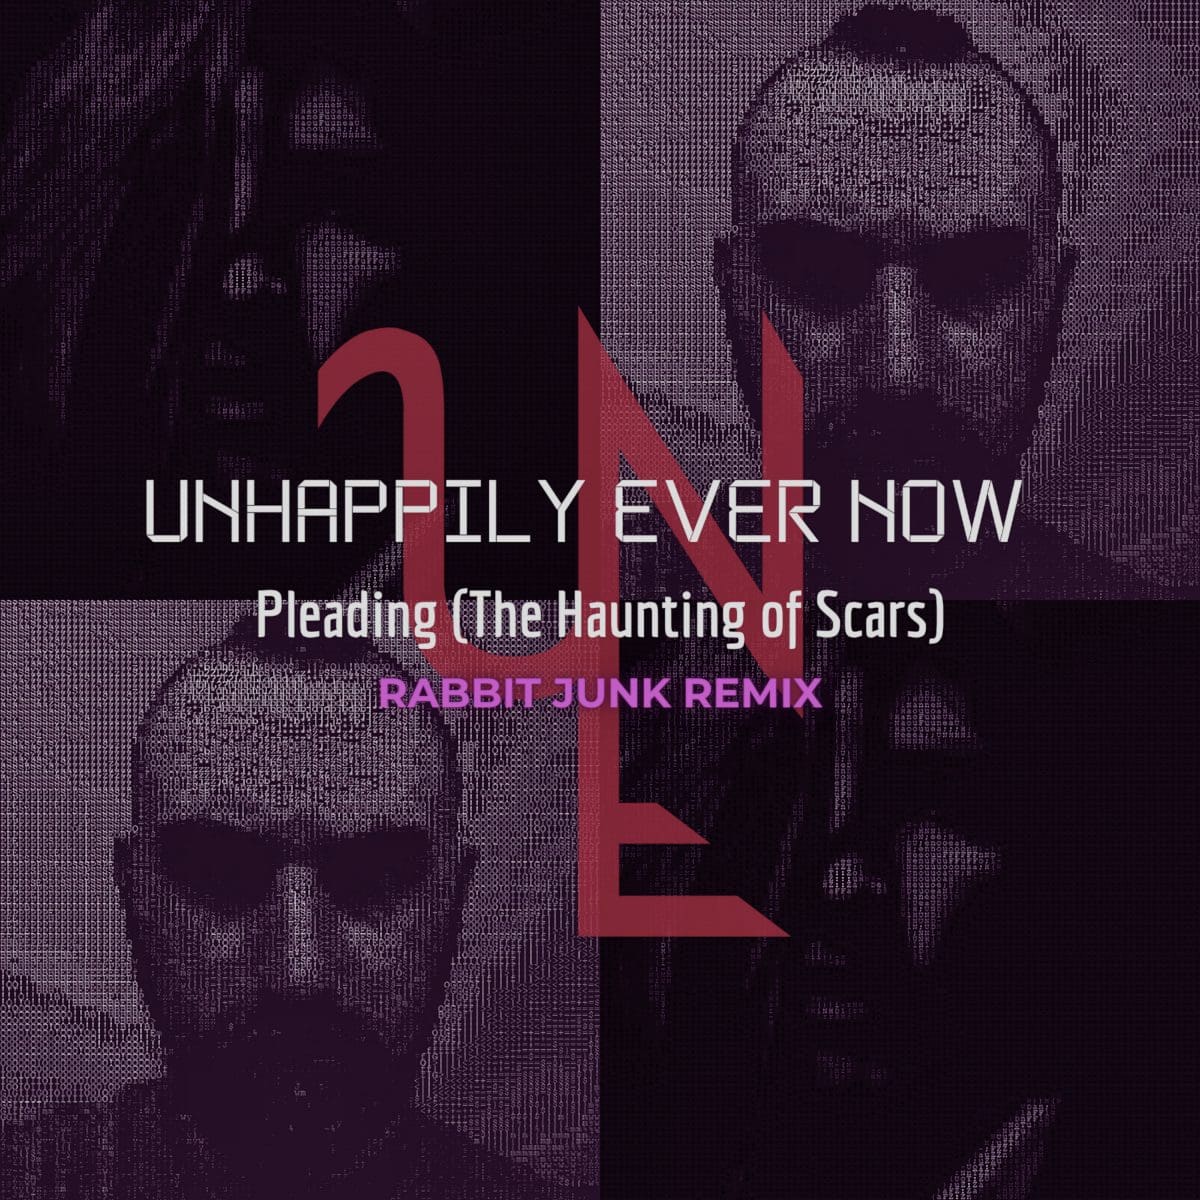 Industrial rock band Unhappily Ever Now drops Rabbit Junk remix of 'Pleading'